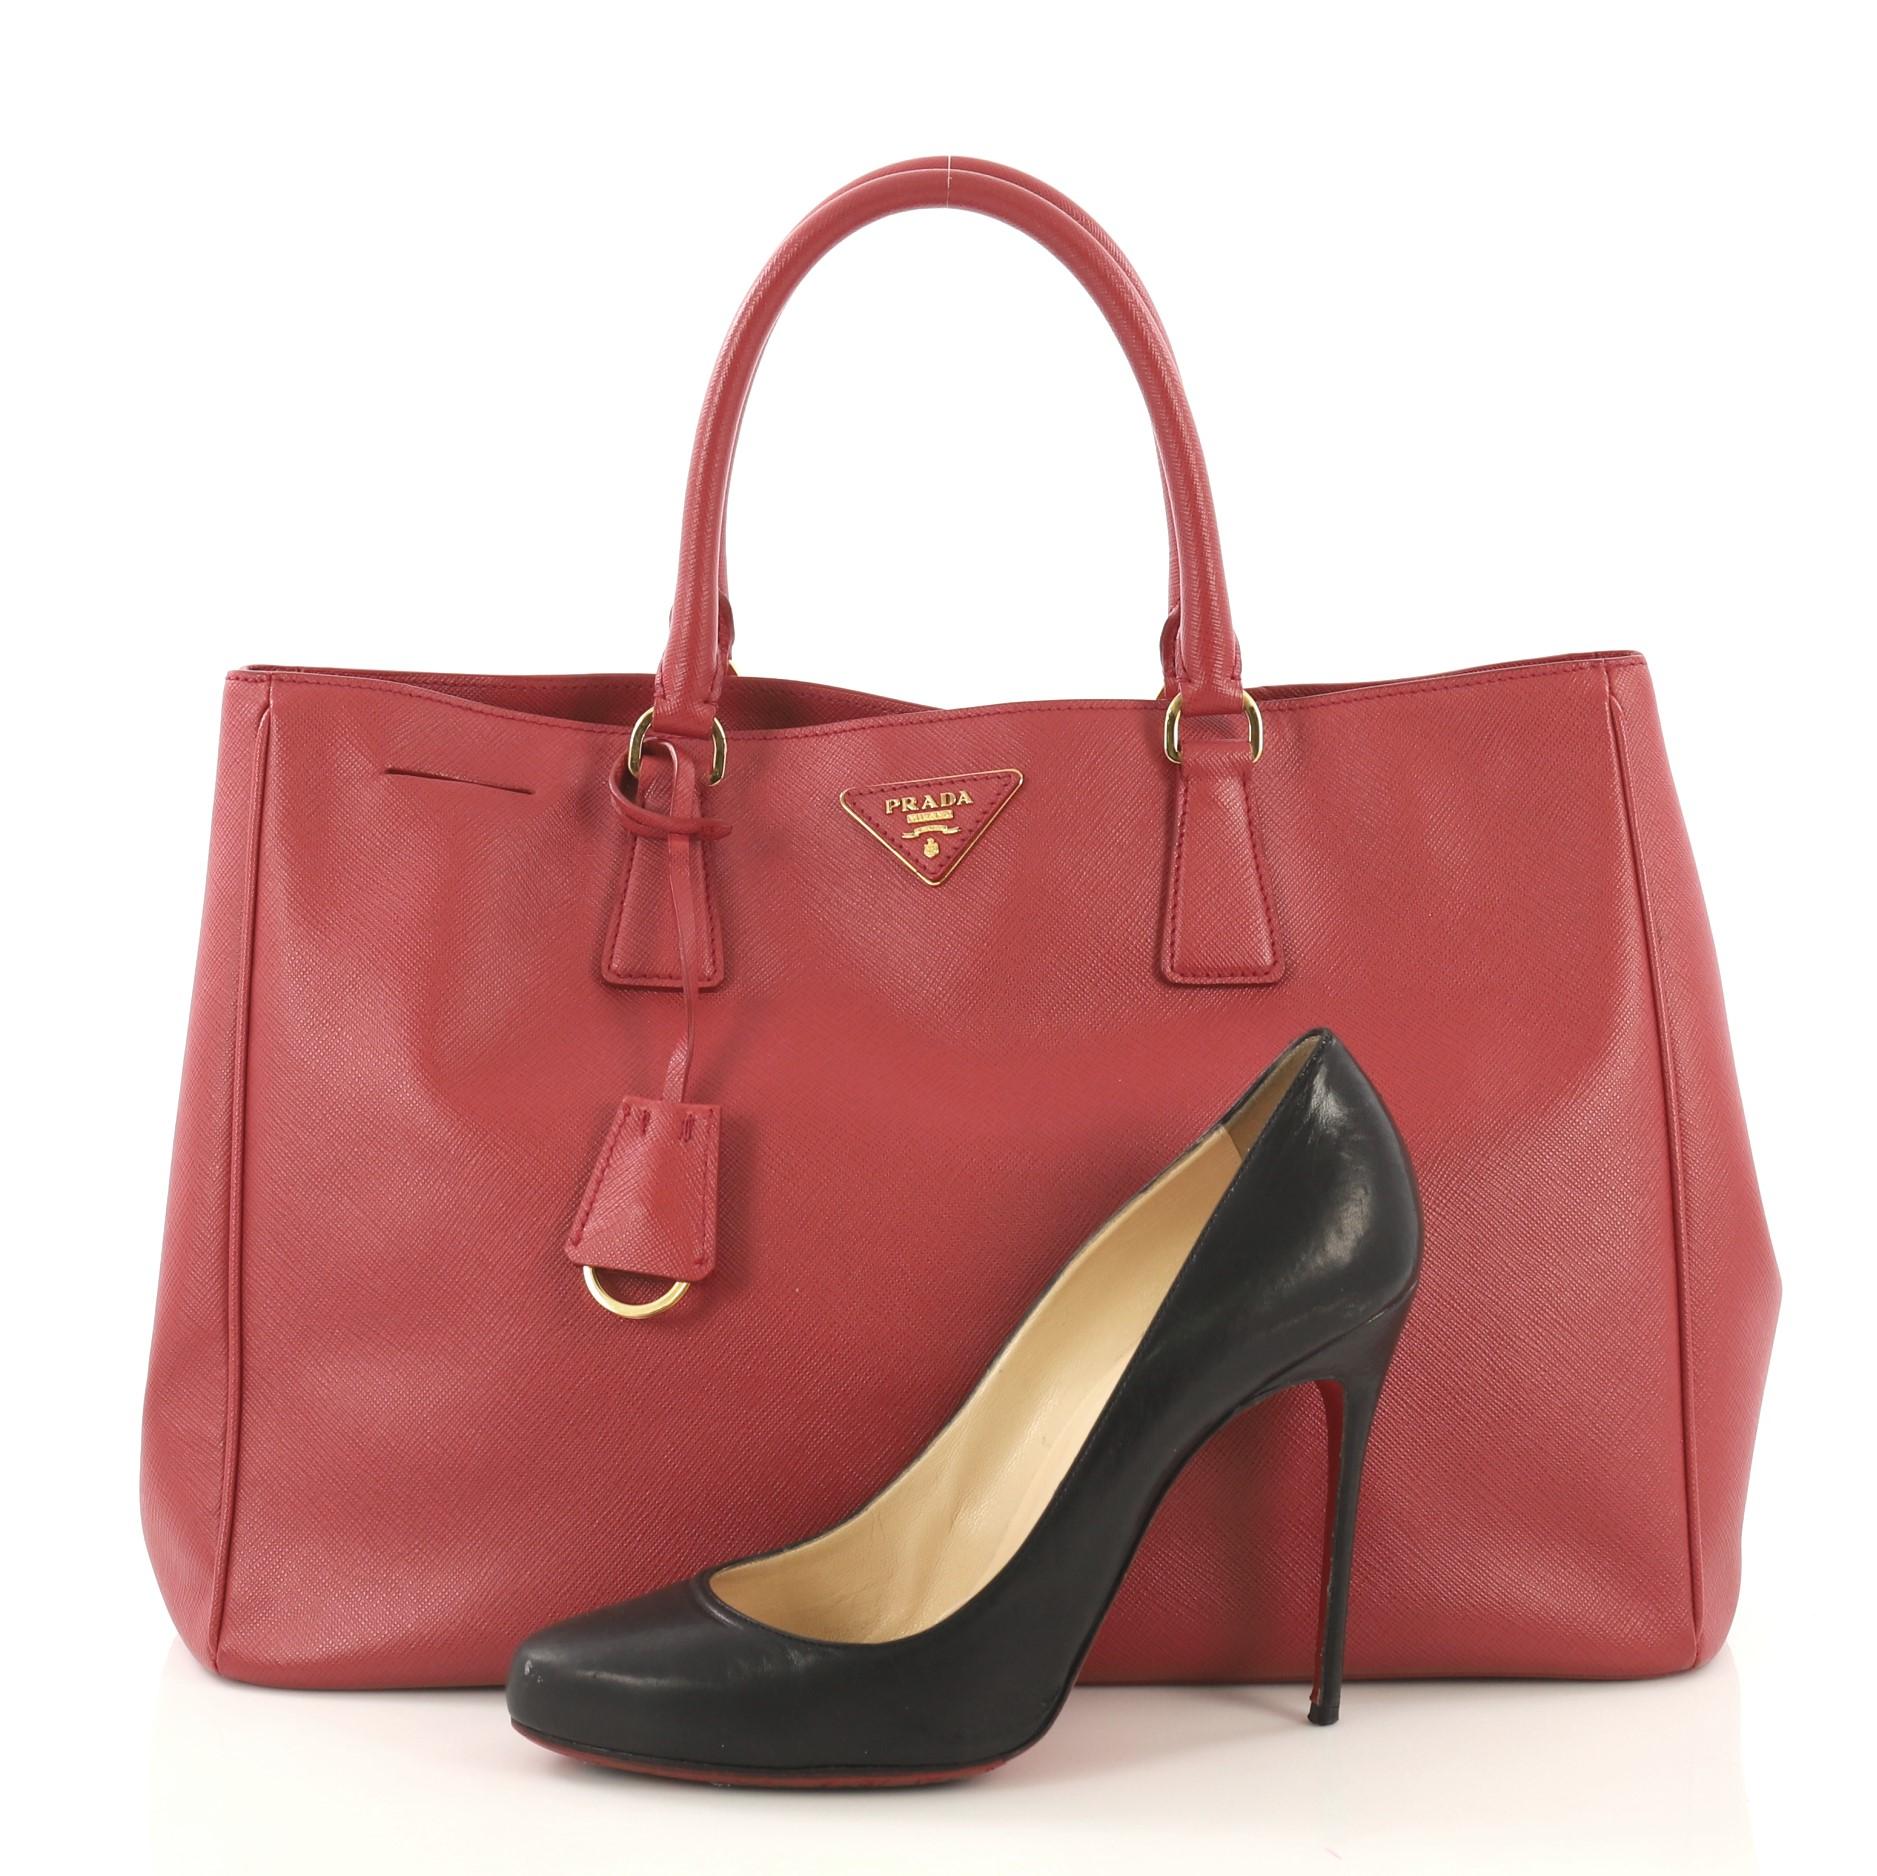 This Prada Lux Open Tote Saffiano Leather Medium, crafted from red saffiano leather, features dual rolled handles, side snap buttons, protective base studs, and gold-tone hardware. Its magnetic snap closure opens to a red fabric interior with side